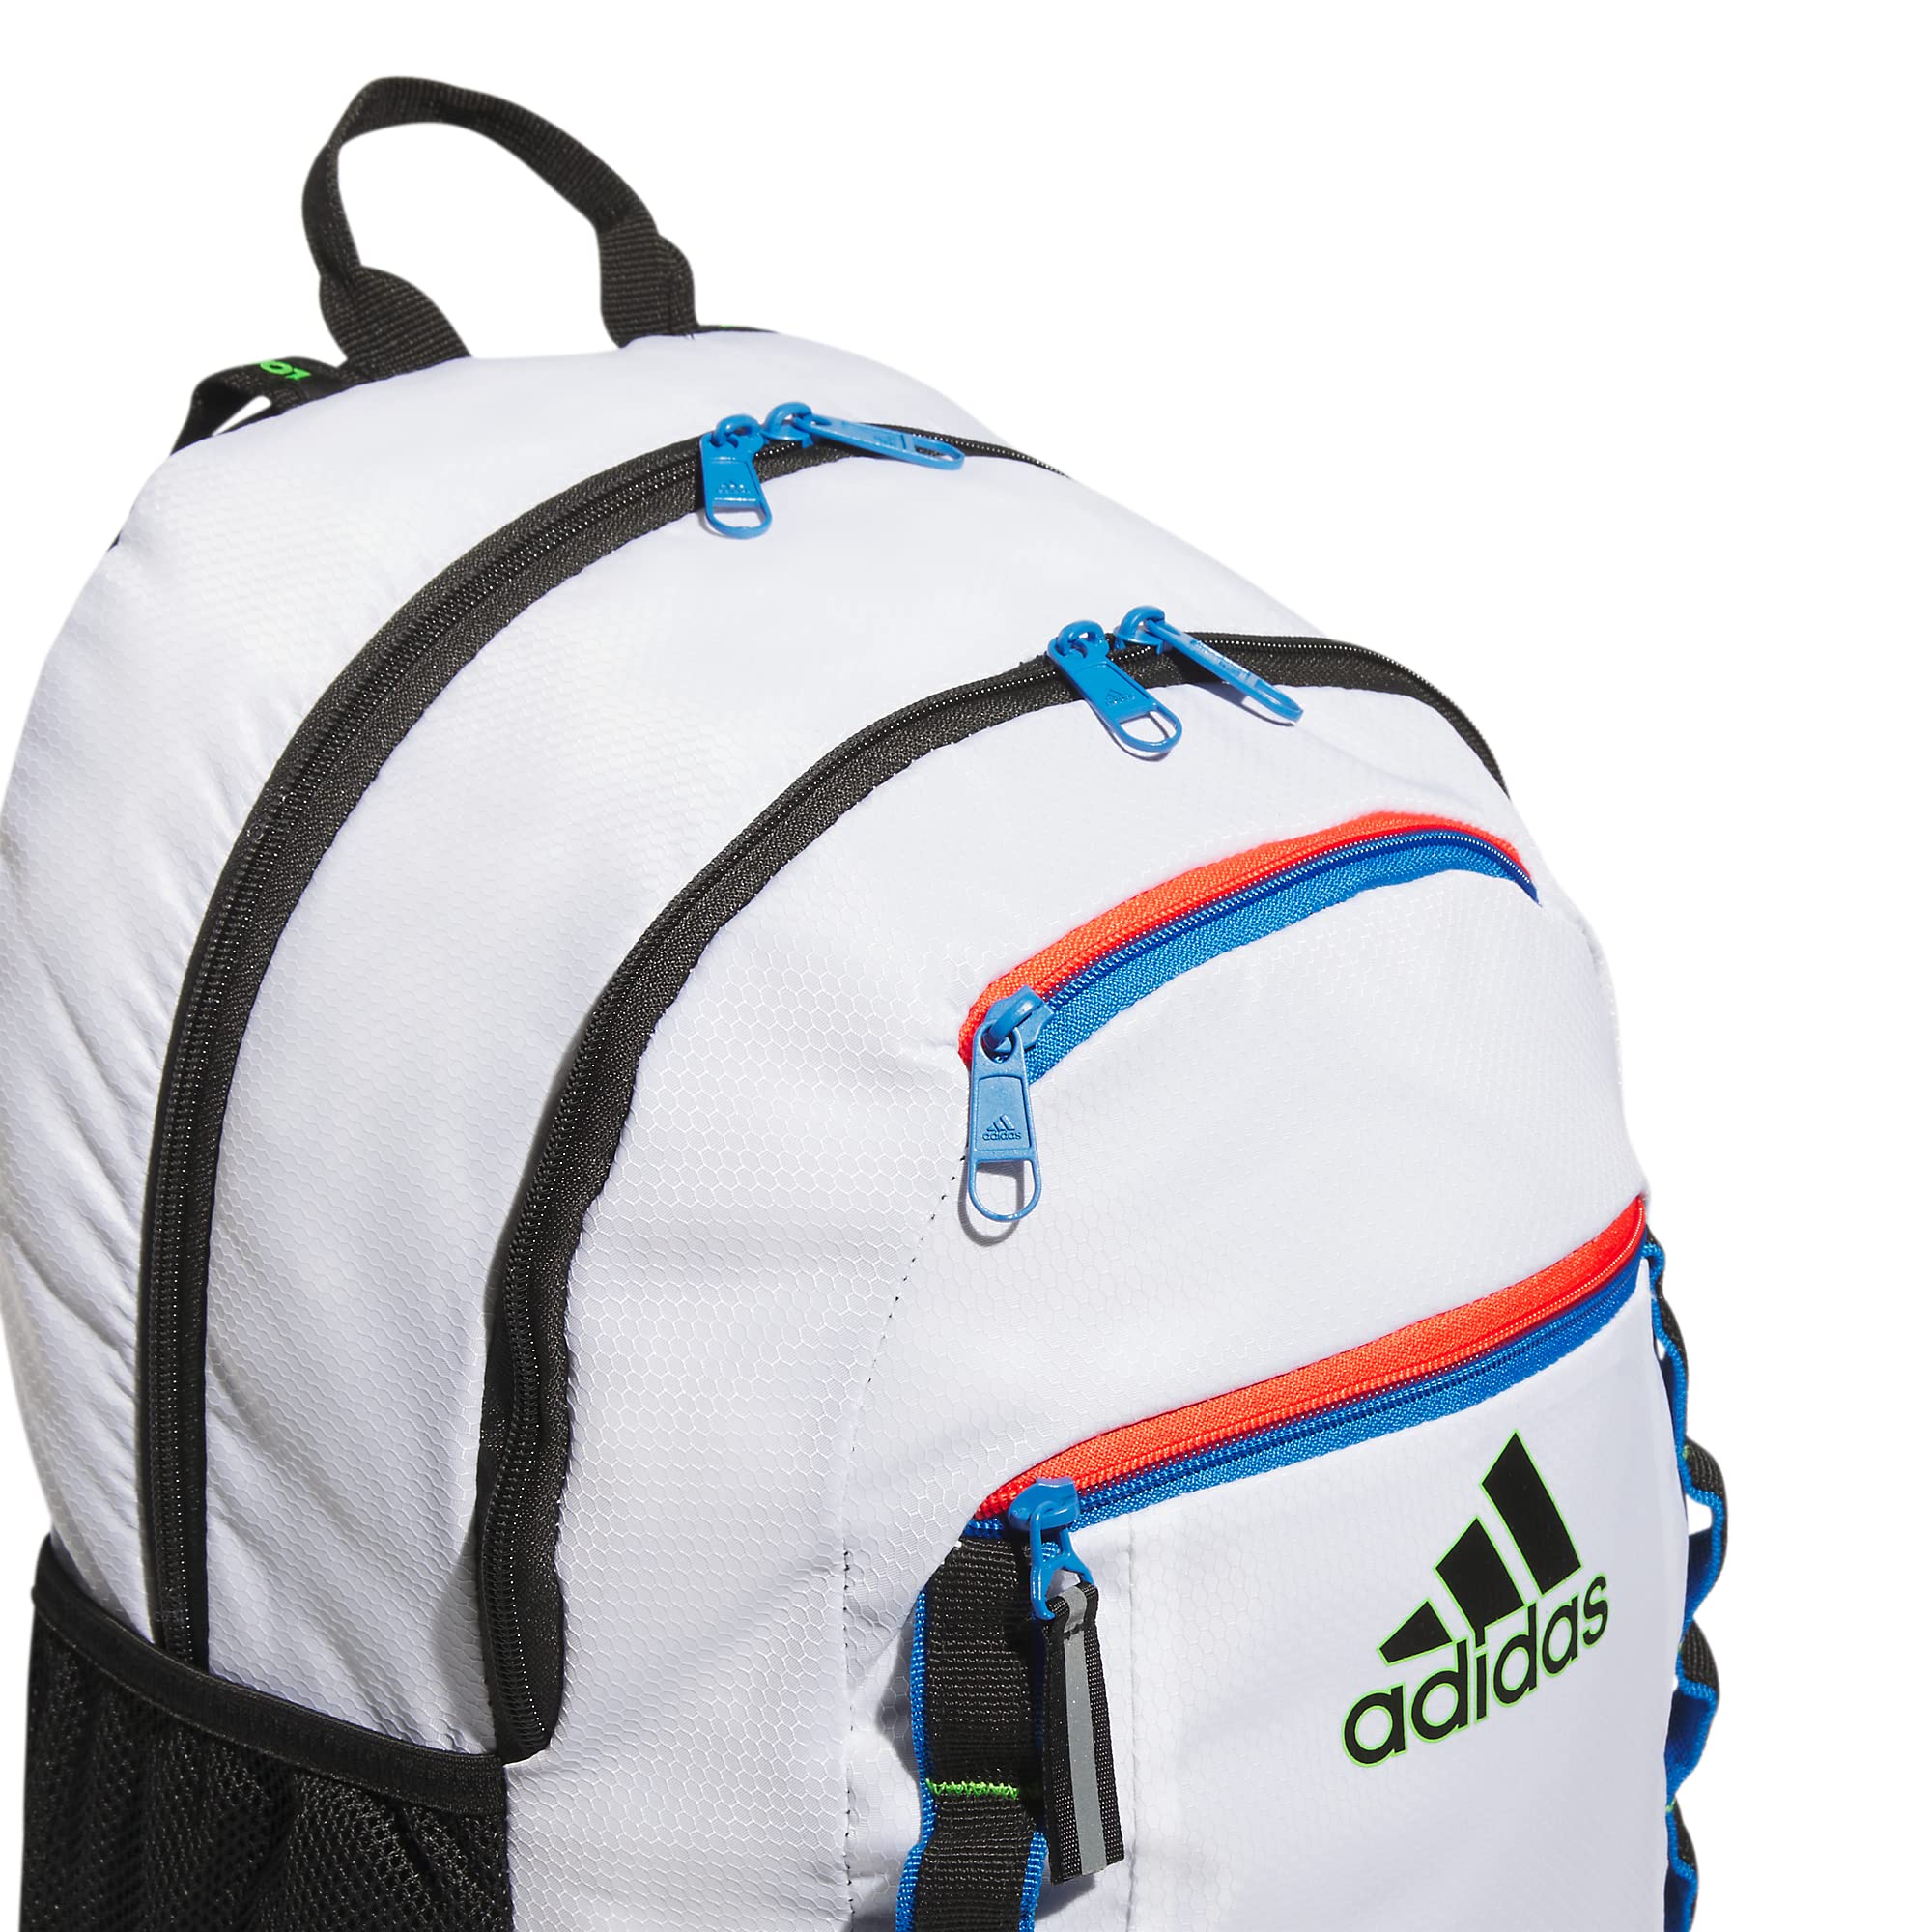 adidas Excel 6 Backpack, White/Bright Royal Blue/Black, One Size